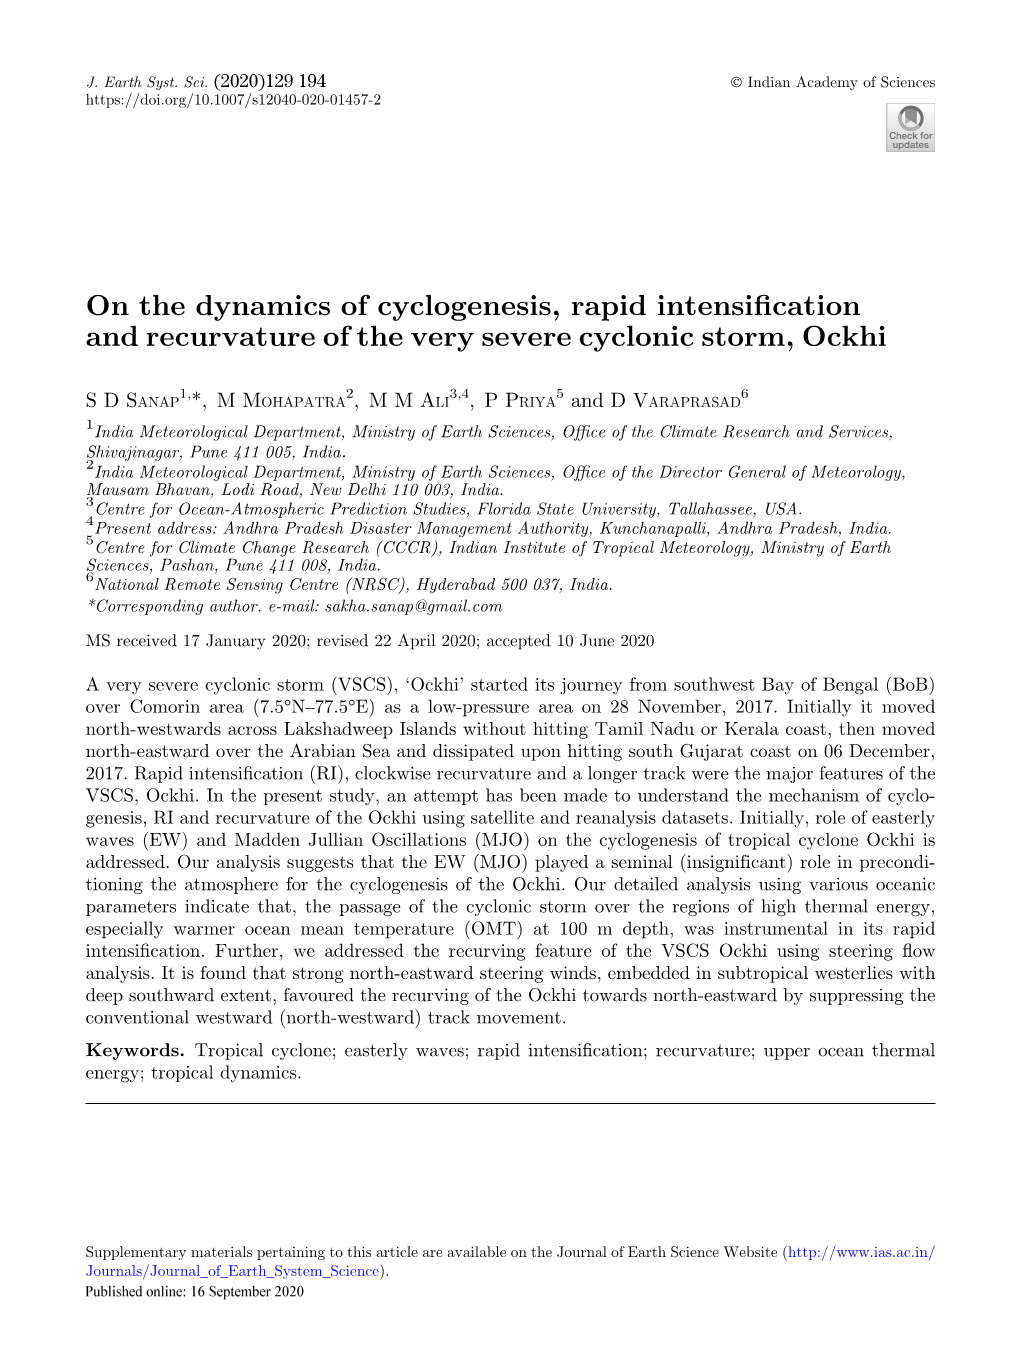 On the Dynamics of Cyclogenesis, Rapid Intensibcation and Recurvature of the Very Severe Cyclonic Storm, Ockhi